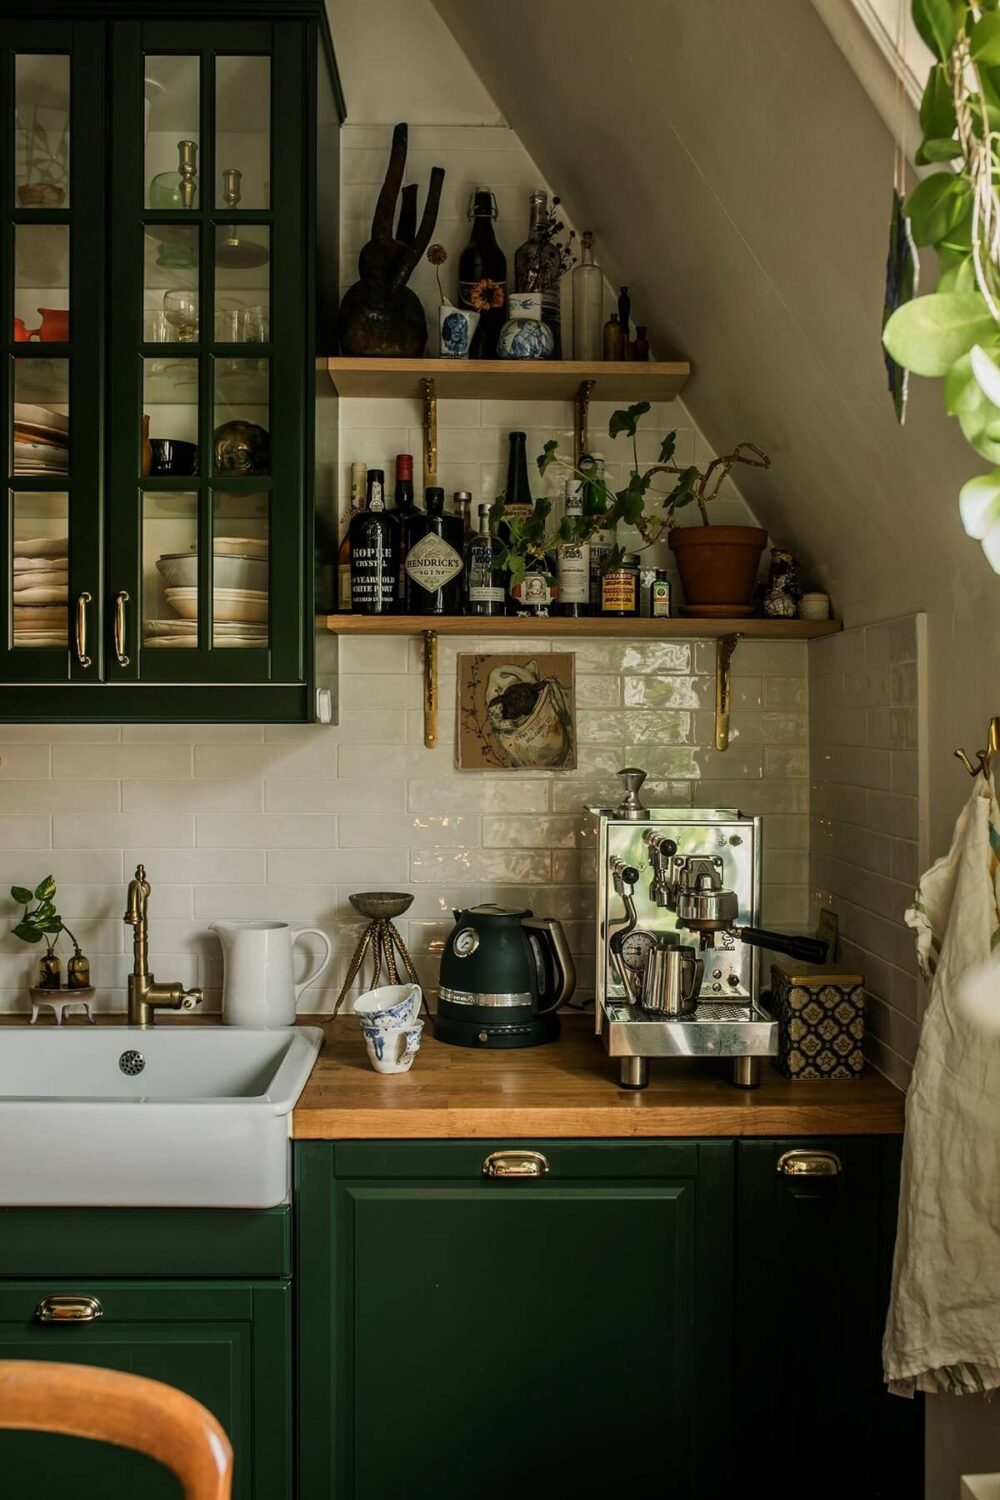 small-kitchen-green-cabinets-shelves-plants-nordroom